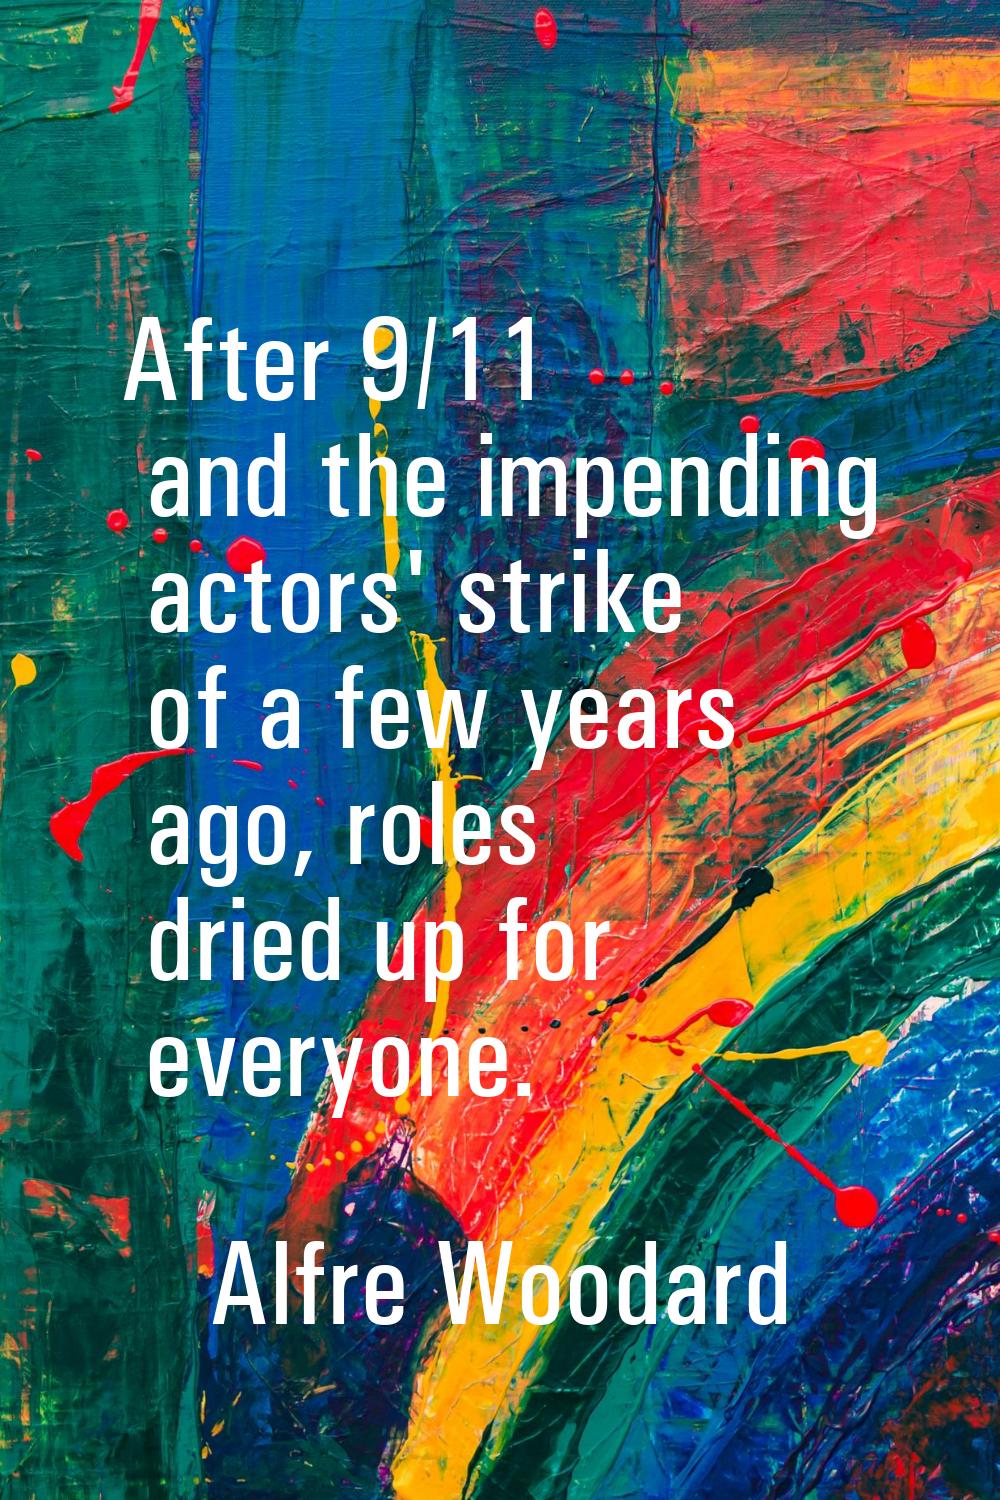 After 9/11 and the impending actors' strike of a few years ago, roles dried up for everyone.